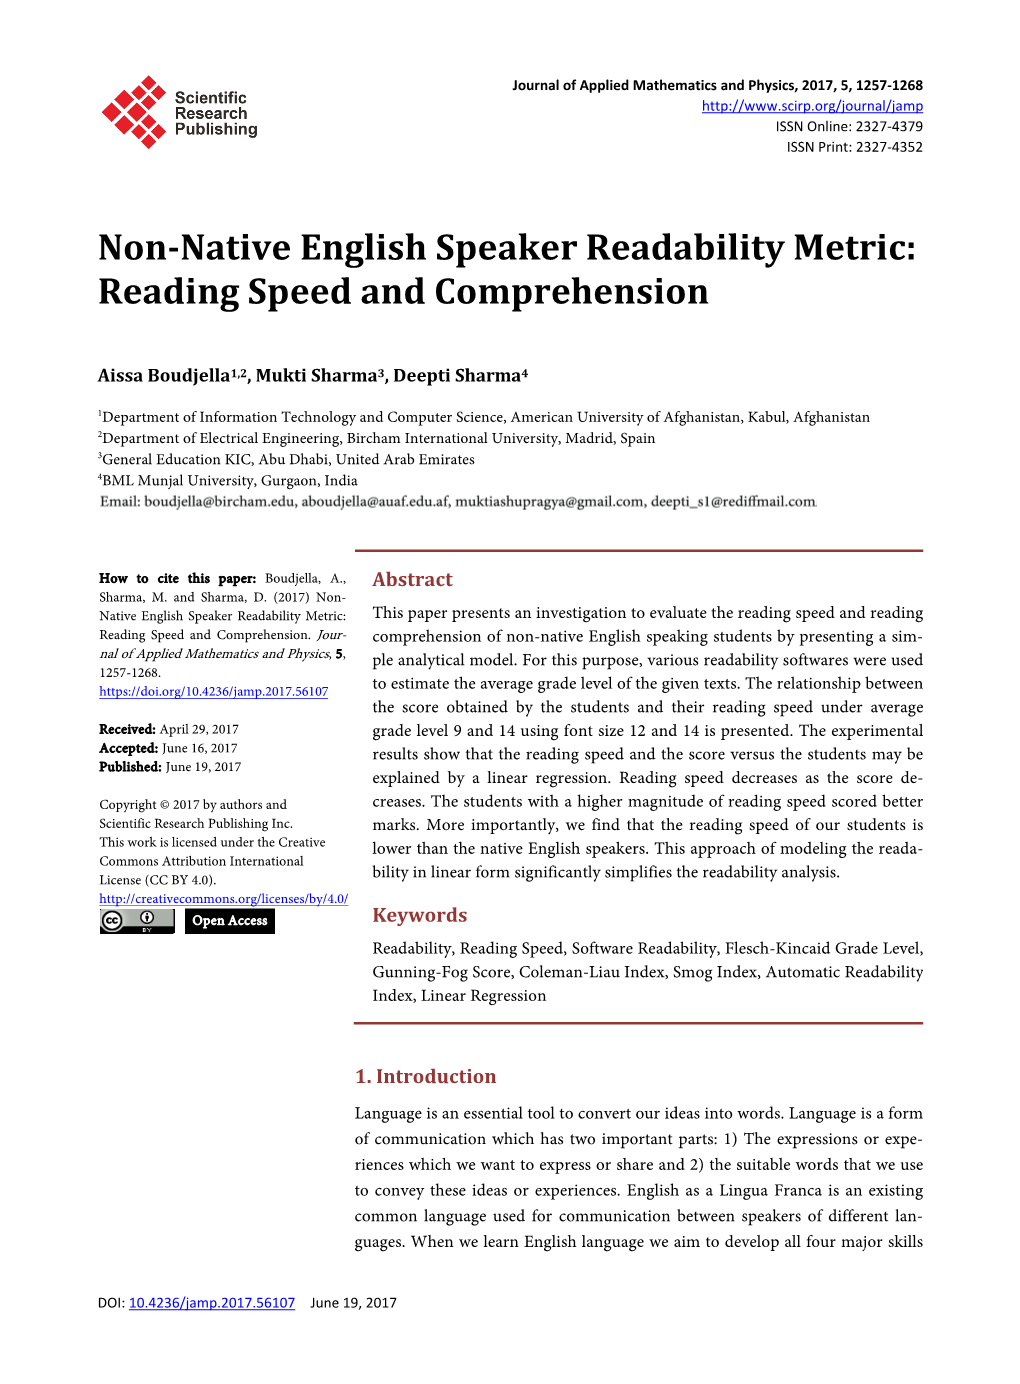 Non-Native English Speaker Readability Metric: Reading Speed and Comprehension